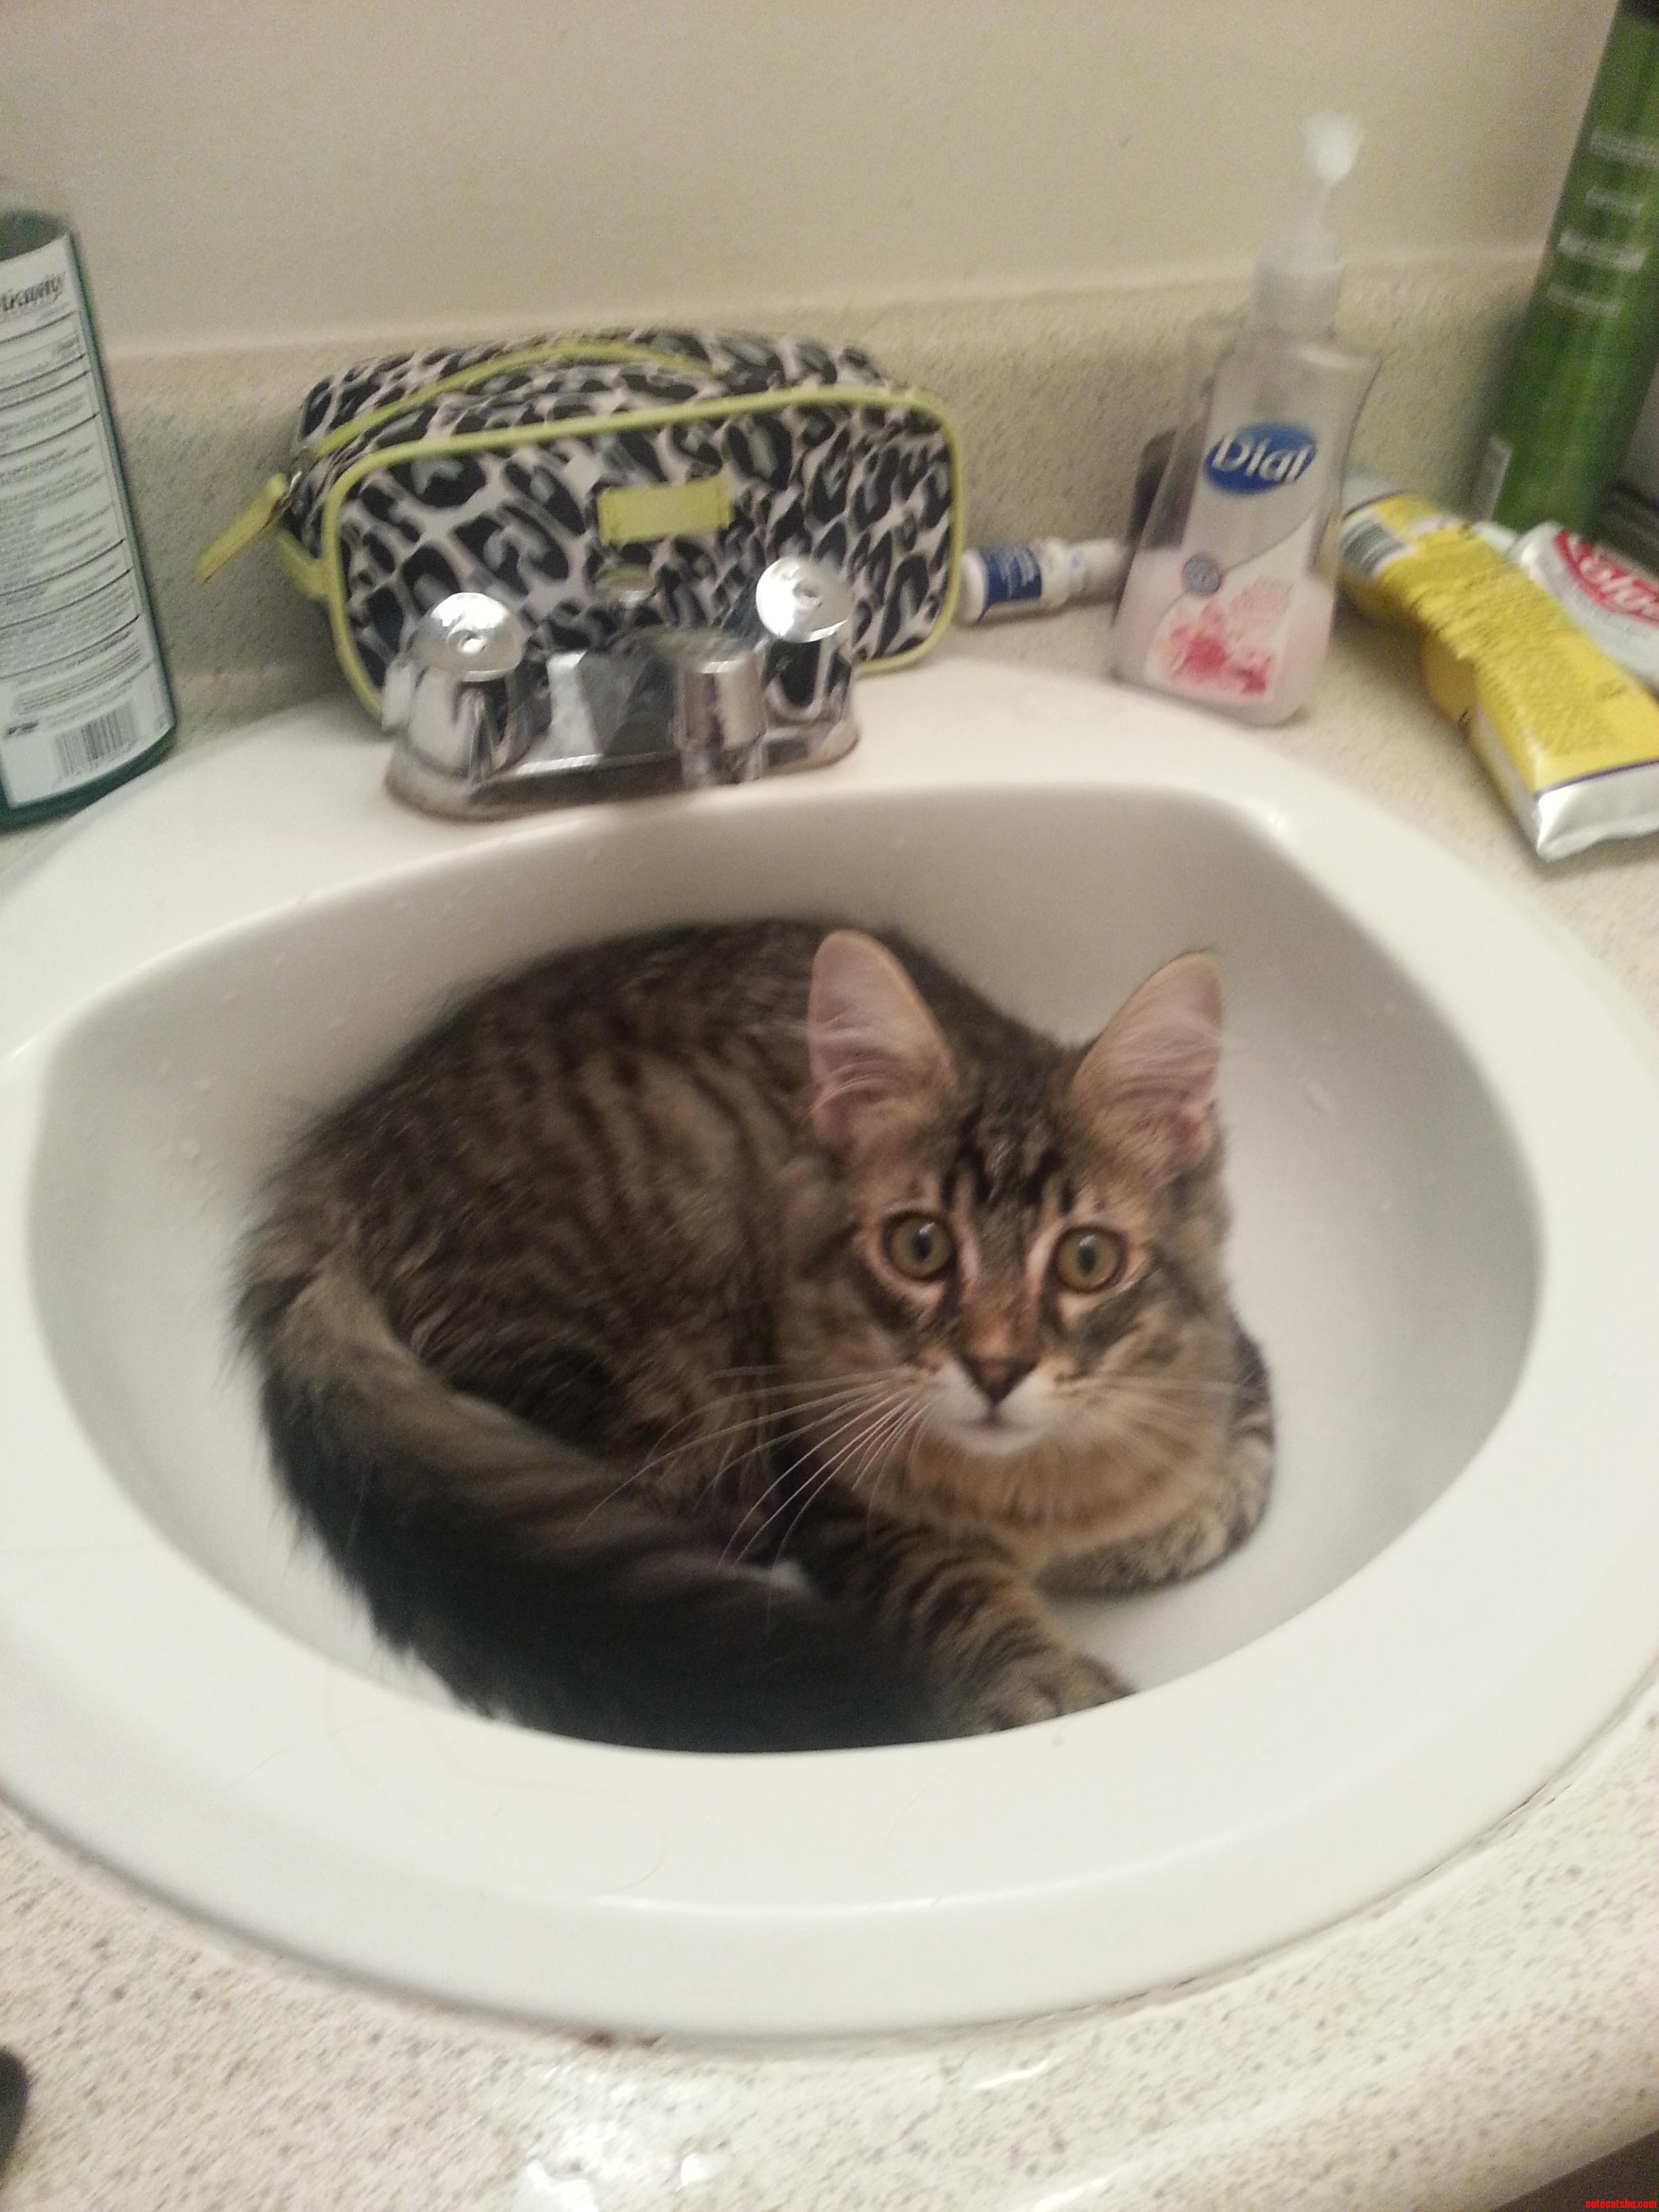 He Sits In The Sink Until I Turn On The Water So He Can Play In It.